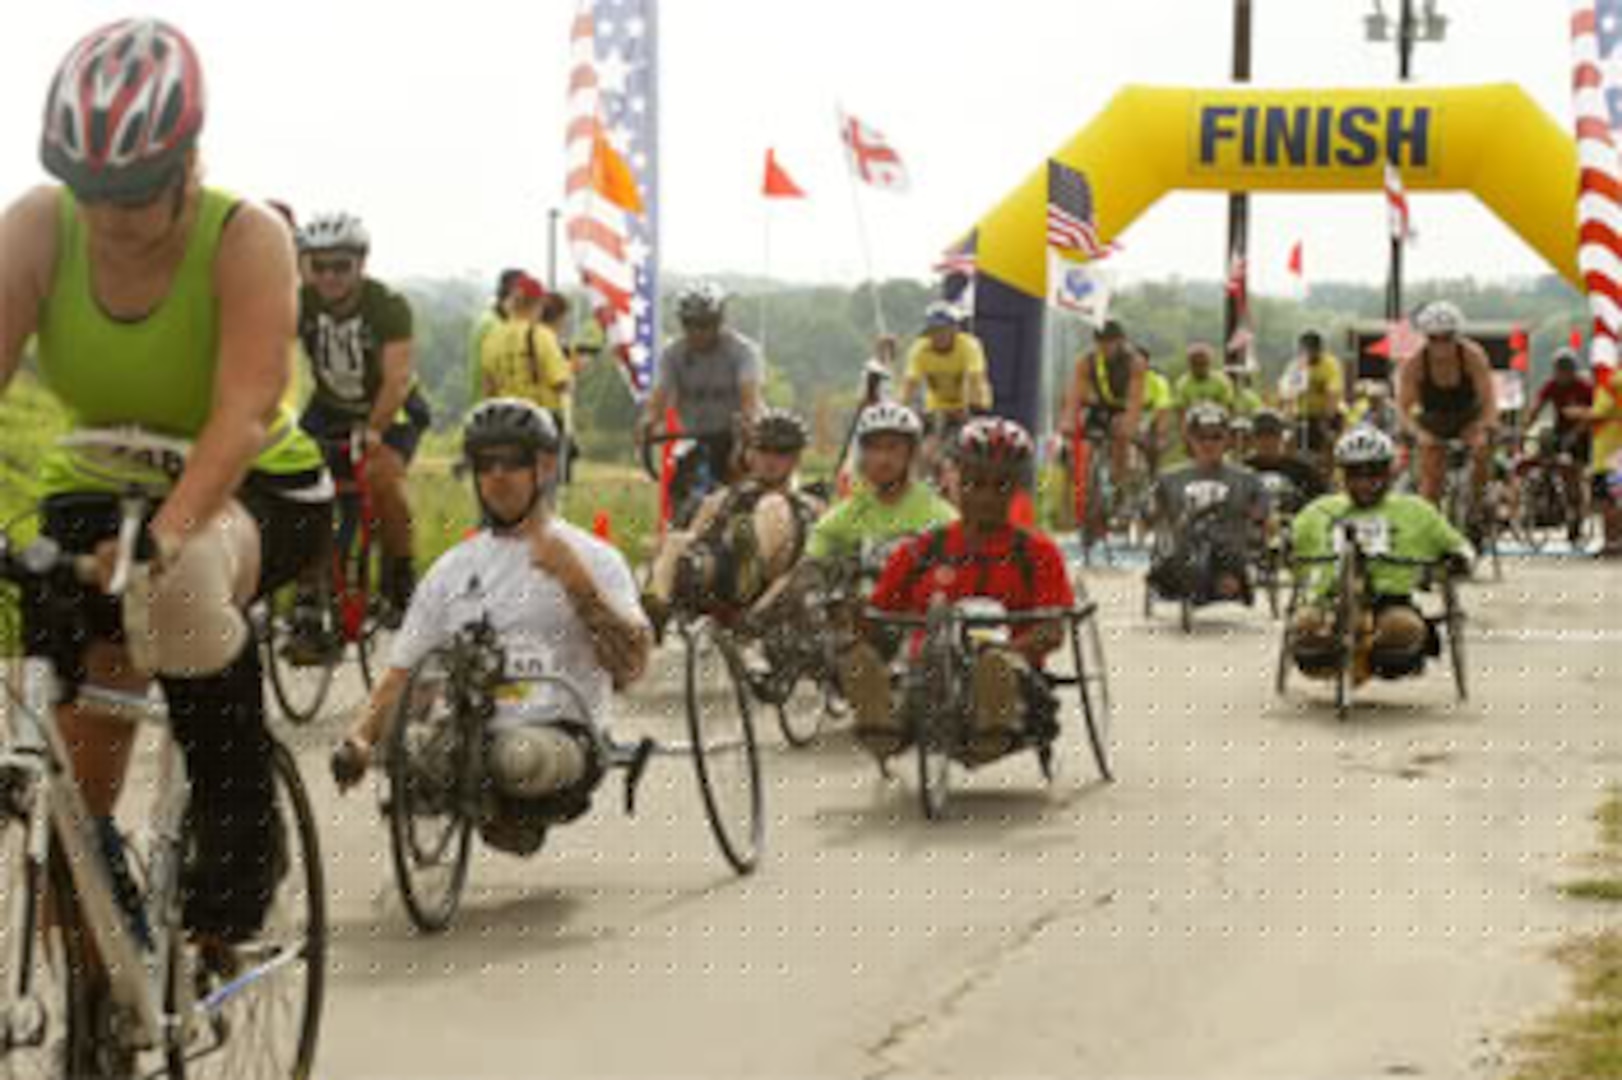 More than 85 wounded warriors participated in non-competitive sports, consisting of a 500-meter swim, 10-mile bicycle ride and a 2-mile run at the Mini-Try held at Joint Base San Antonio Fort Sam Houston May 18.  (Photo by Jen Rodriguez)

